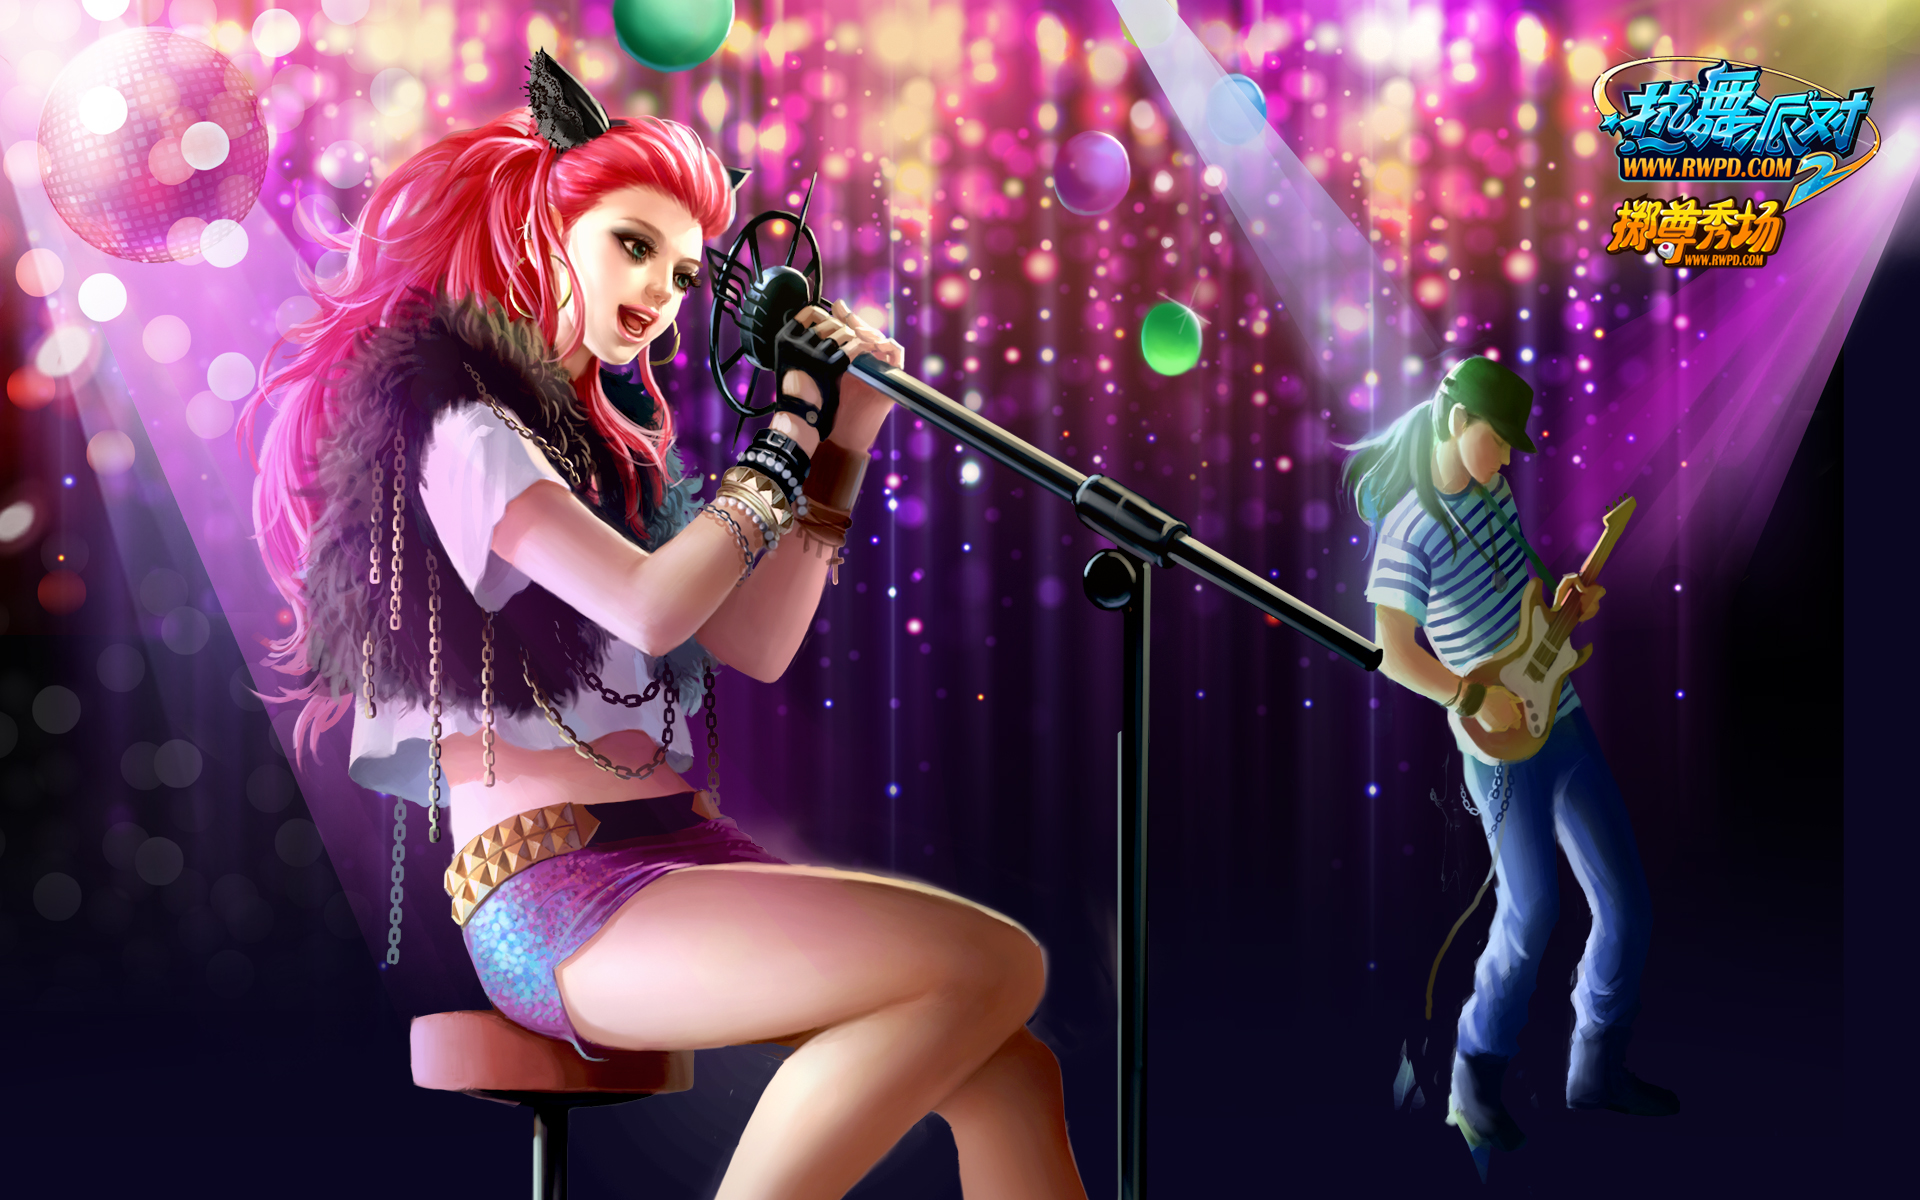 Dance Party Background Images